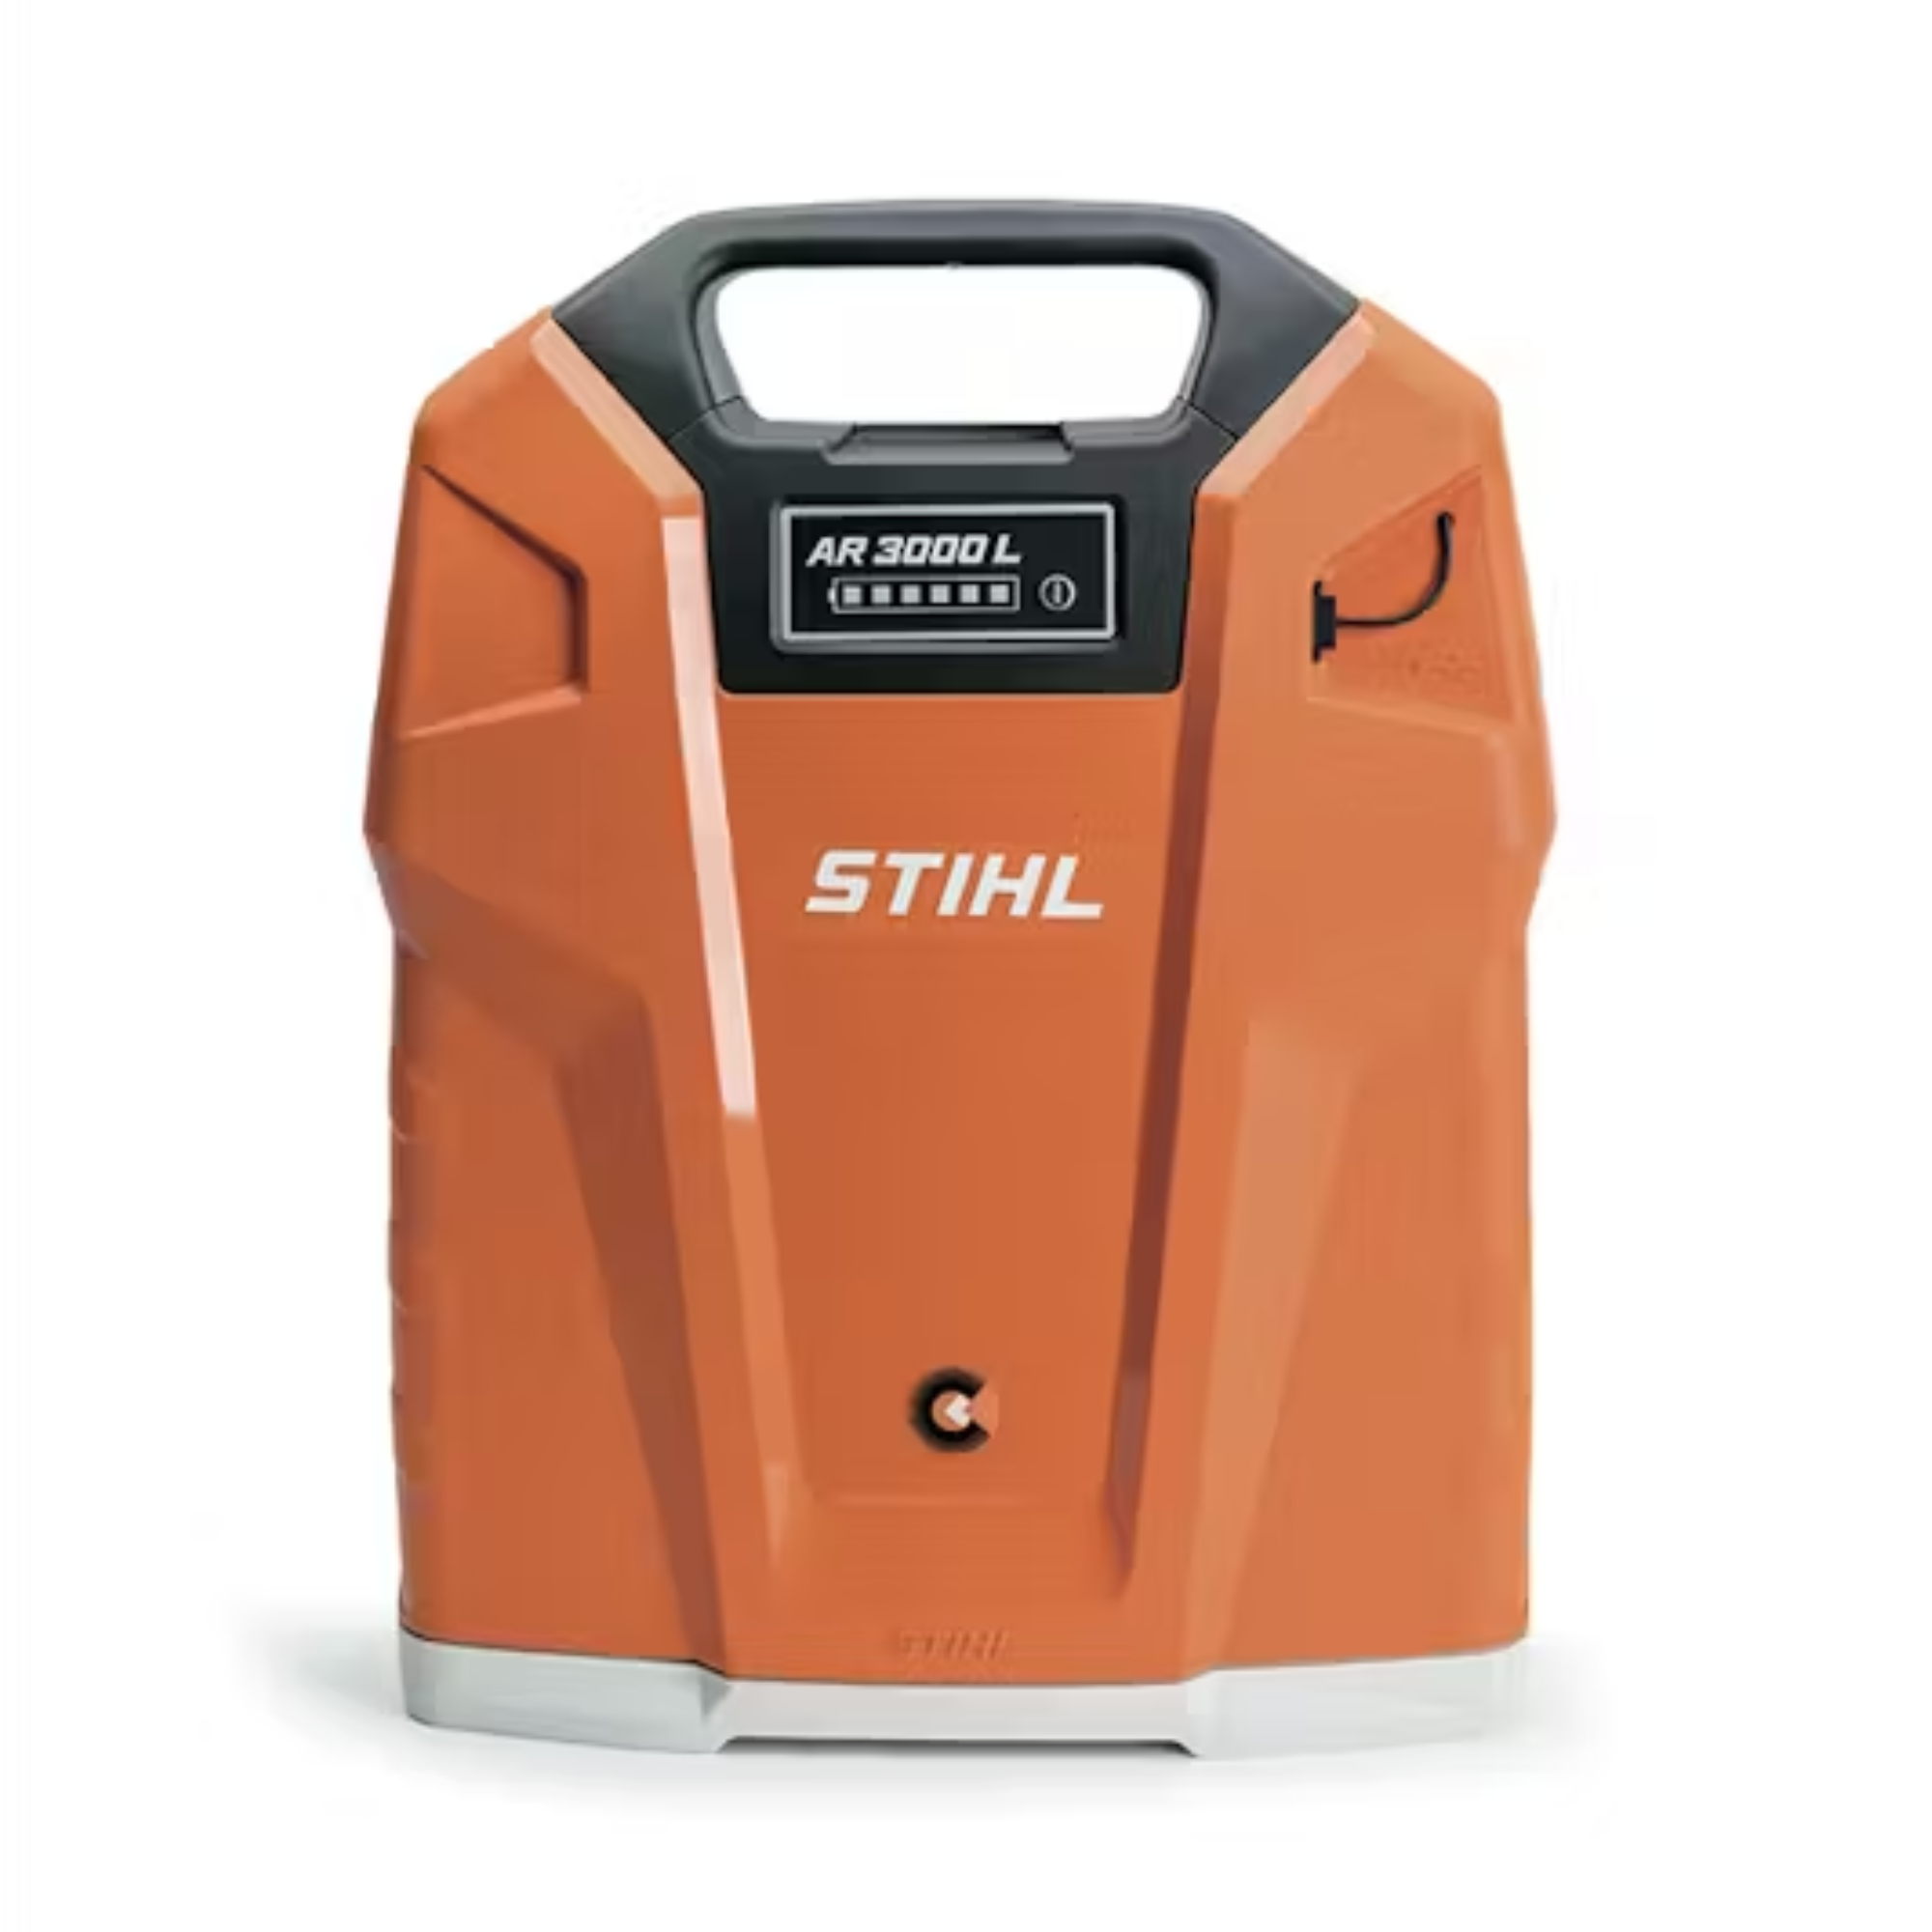 Stihl AR 3000 L Lithium Ion Backpack Battery